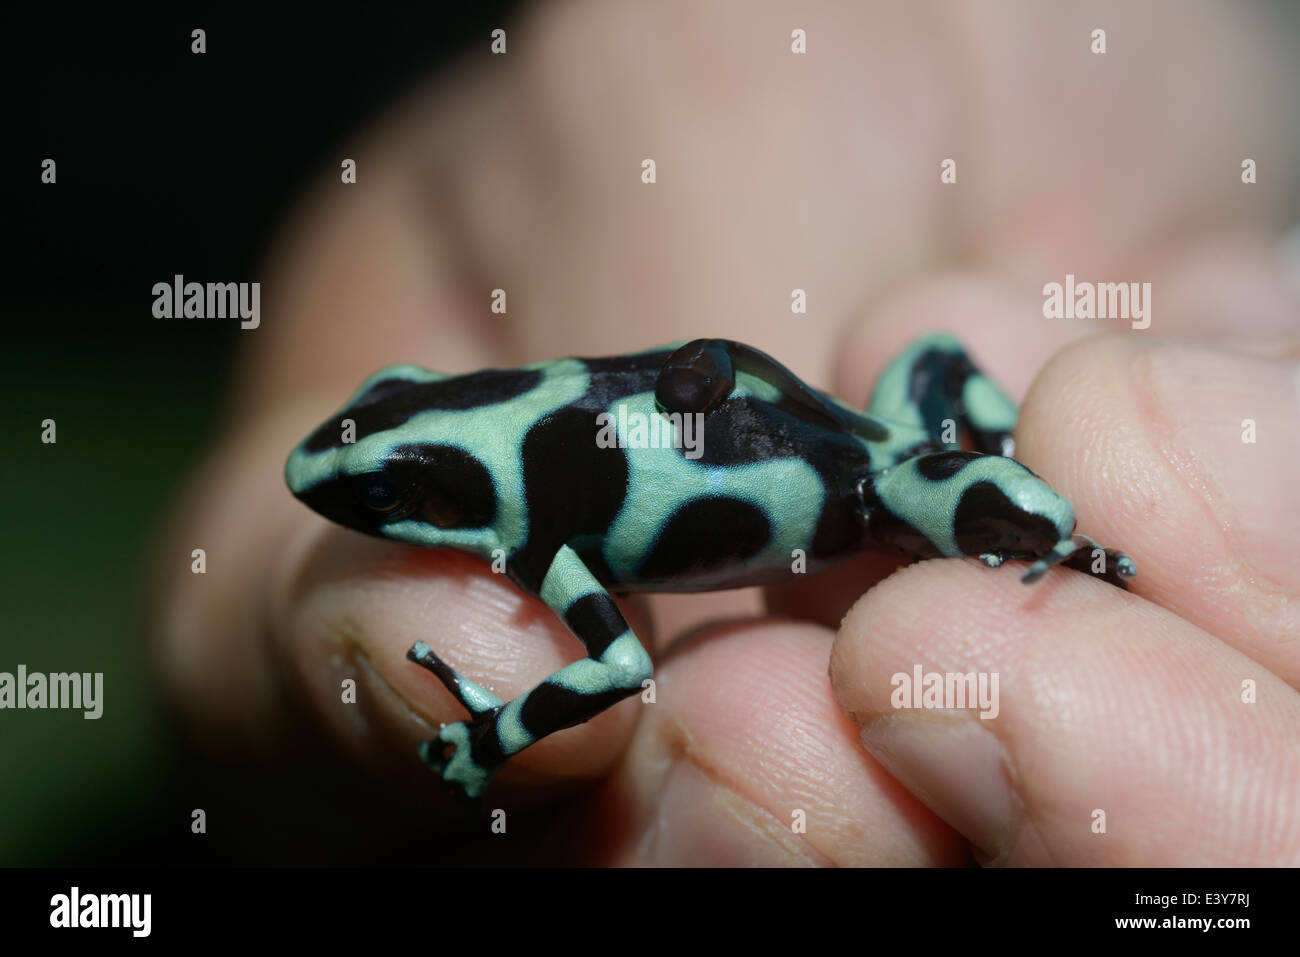 Green and Black Poison Frog, Dendrobates auratus, male carrying tadpole on his back - held by researcher Stock Photo